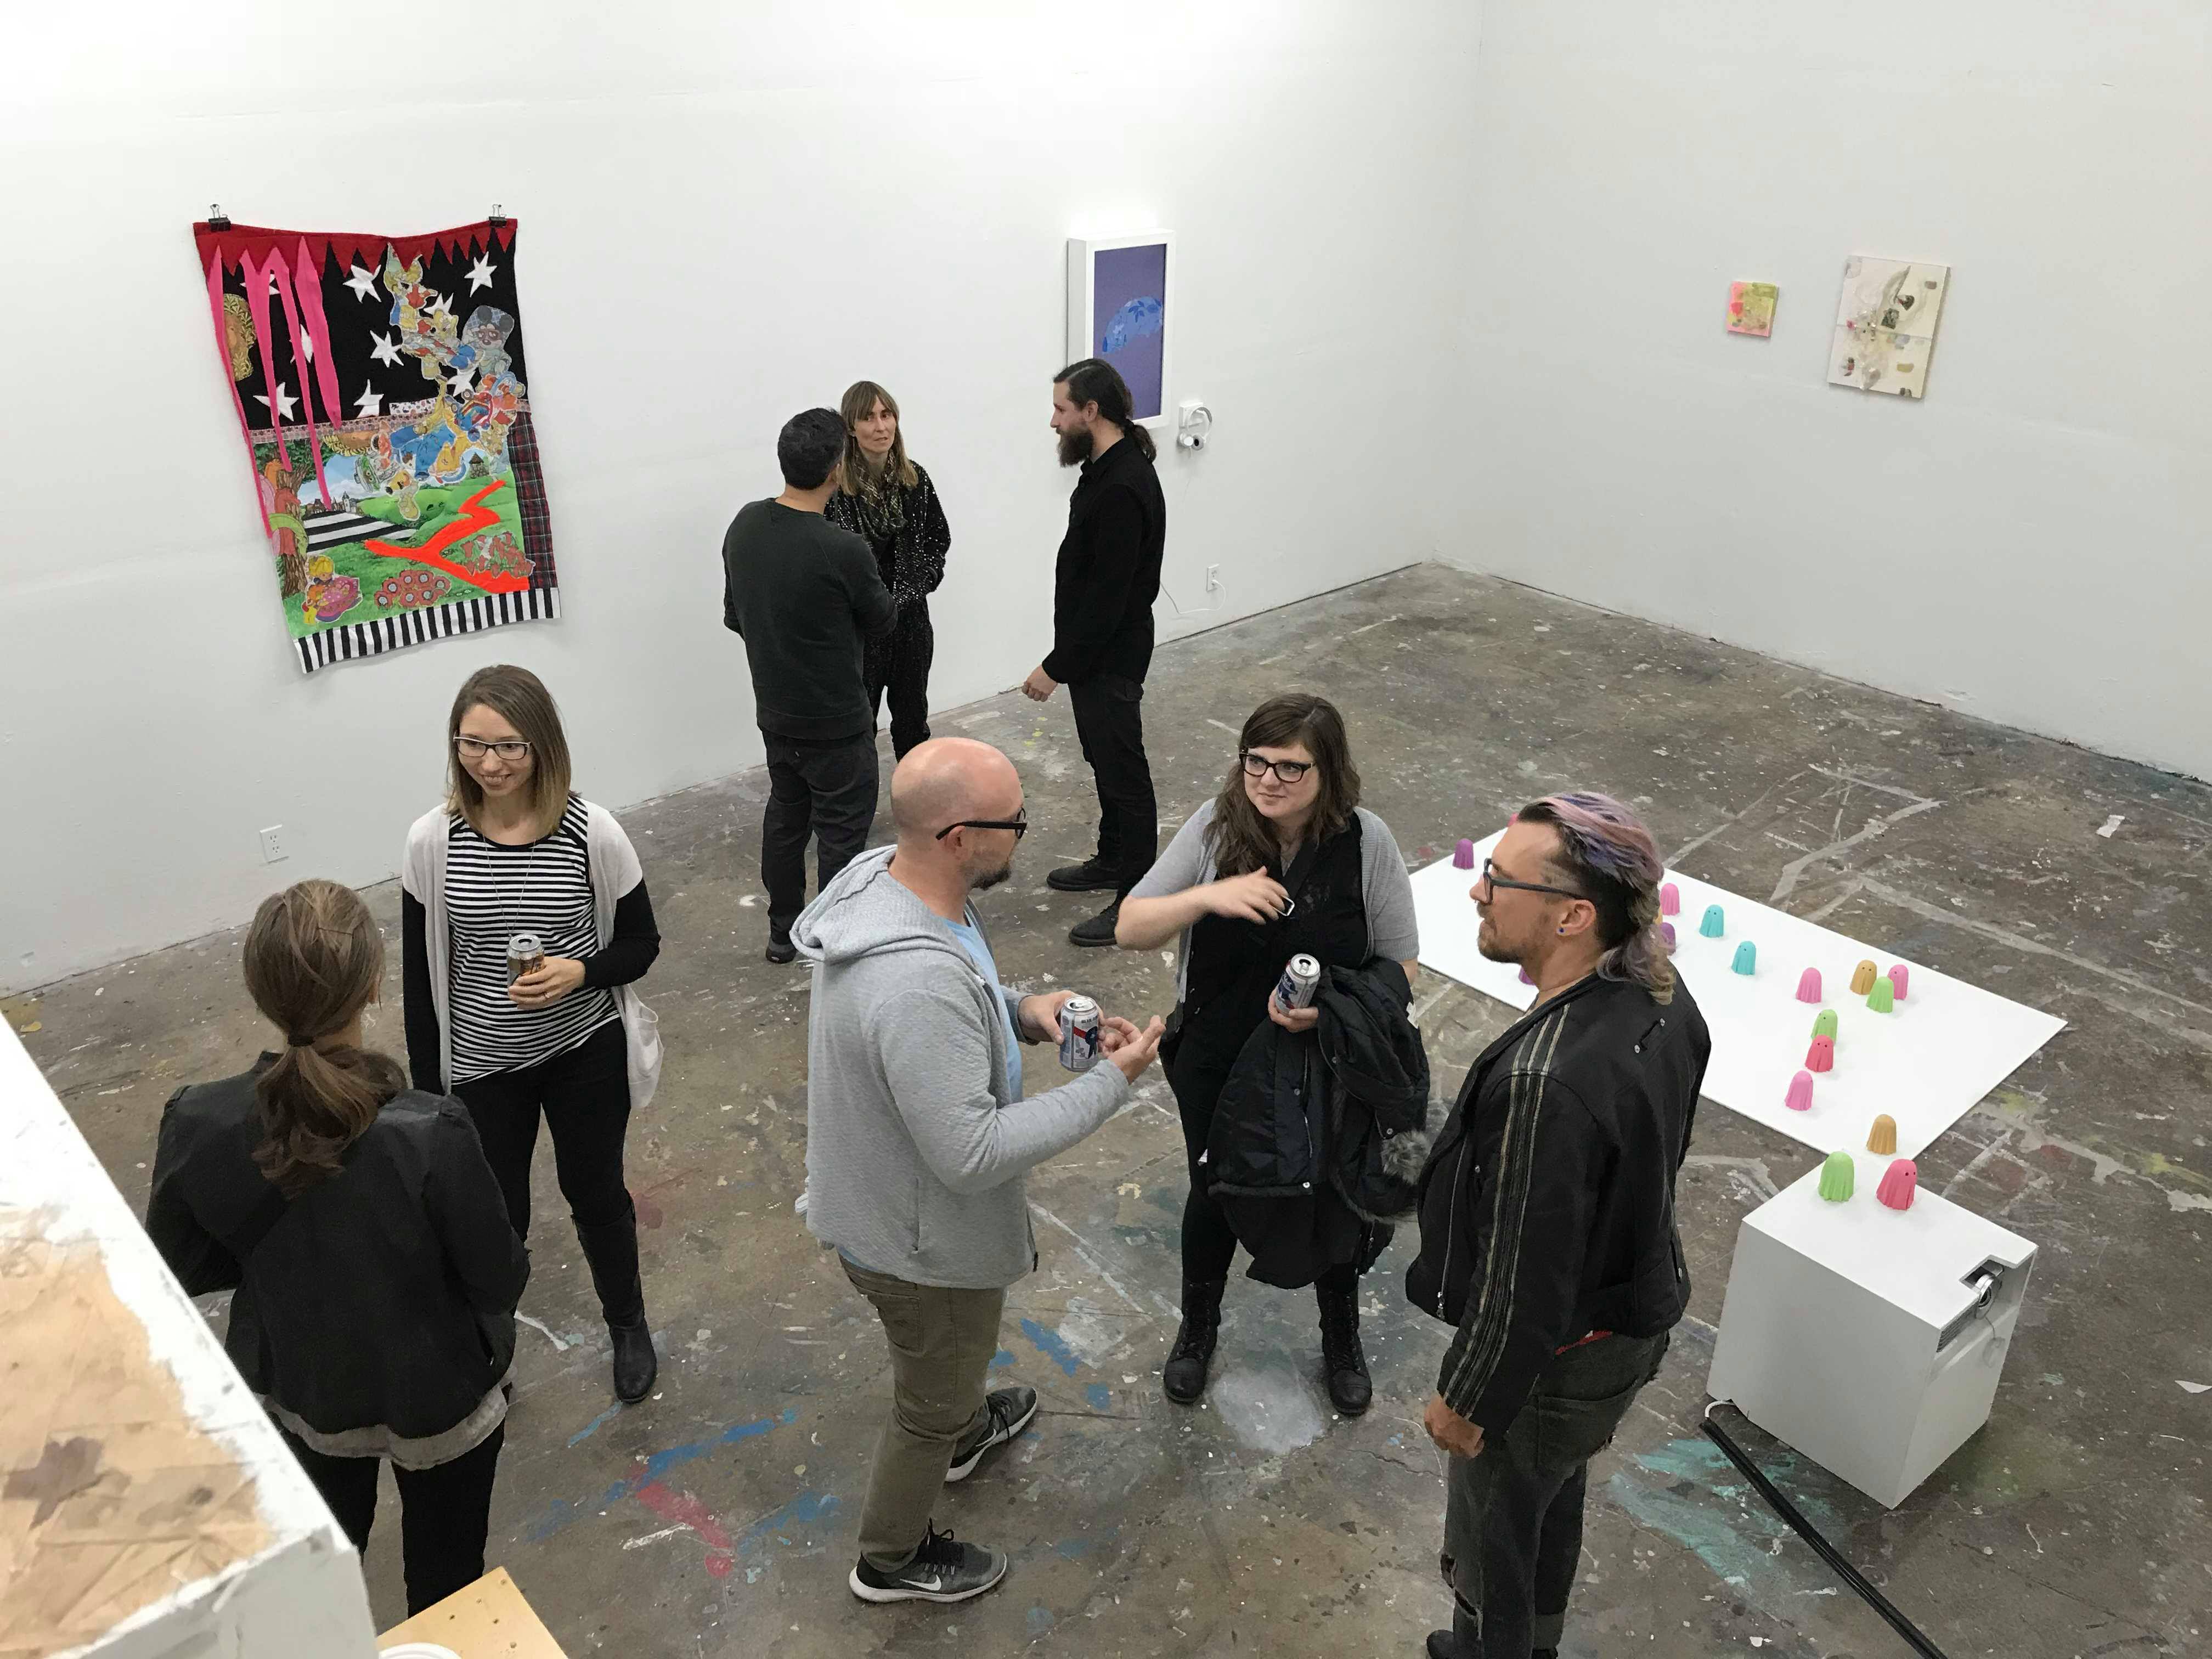 Overhead view of the white cube space of the art gallery Tropical Contemporary. There is art on the walls and on the floor. Small groups of people are standing together engaged in conversation.